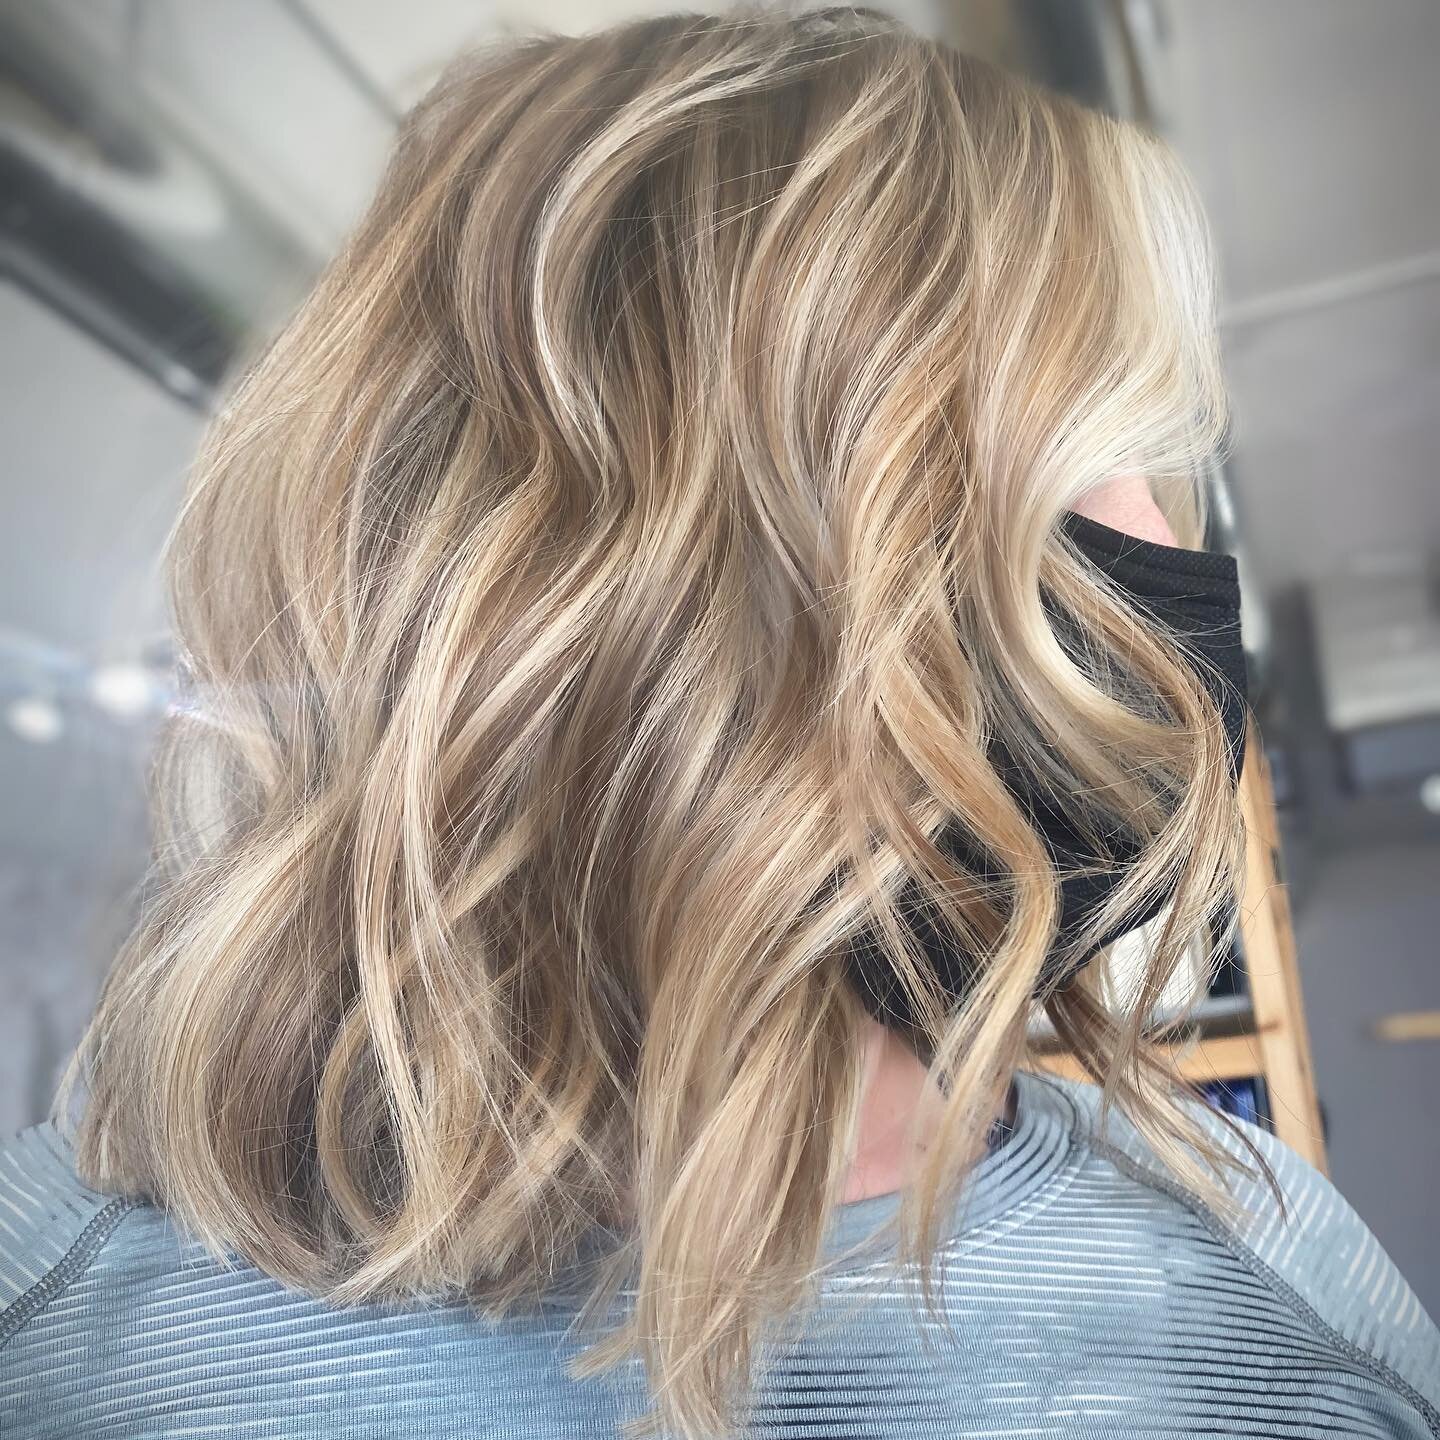 That dimension and money piece though.
&bull;
&bull;
Open air balayage with @pulpriothair Clay Lightner and @wella 7/17KP. Toned all over with @redken SEQ. Styled with @oribe and @bioionic_pro. 
&bull;
&bull;
@mastersofbalayage @behindthechair_com